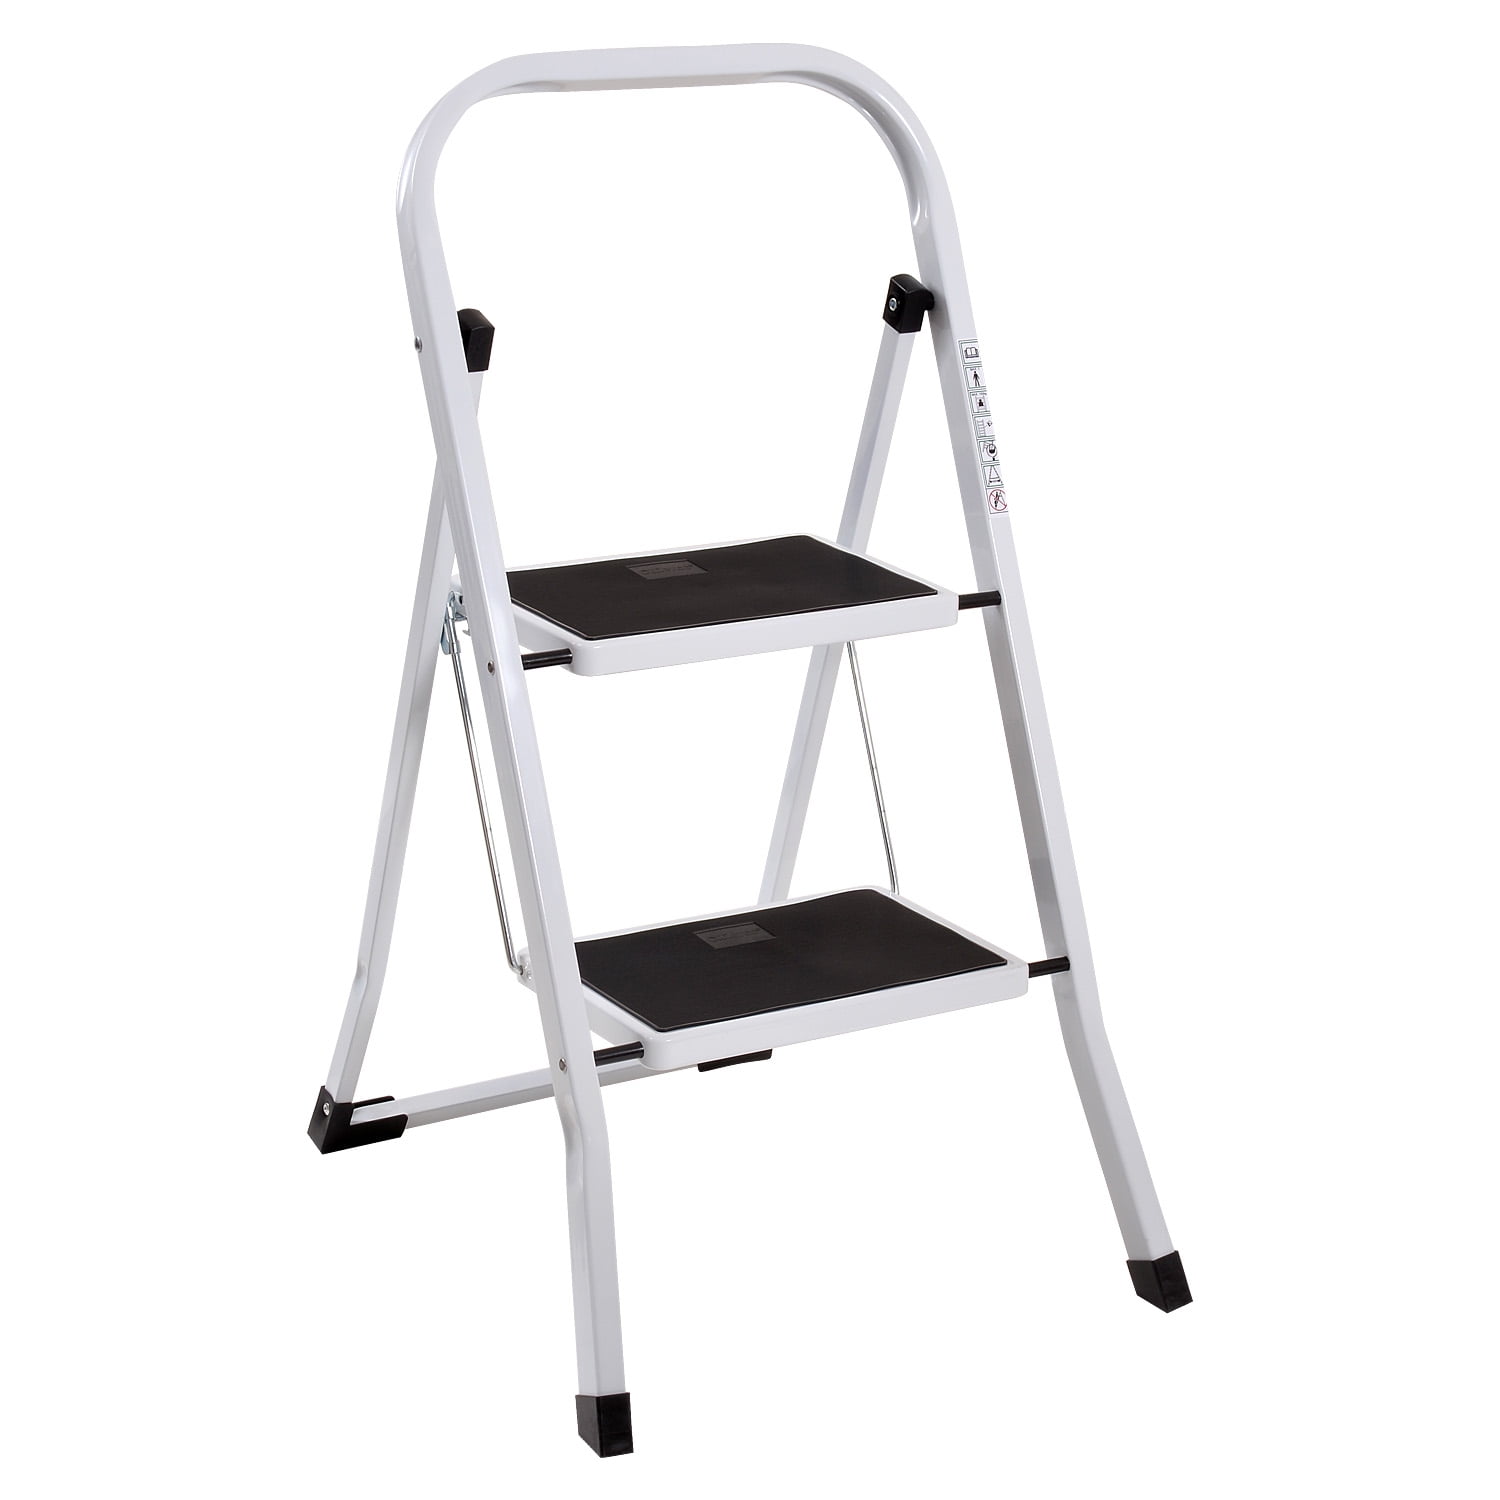 2 Step Ladder Iron Steel Heavy Duty 330lbs Capacity Folding Foldable Portable Wide Non Slip 2 Tread Stepladders Safety Light Weight